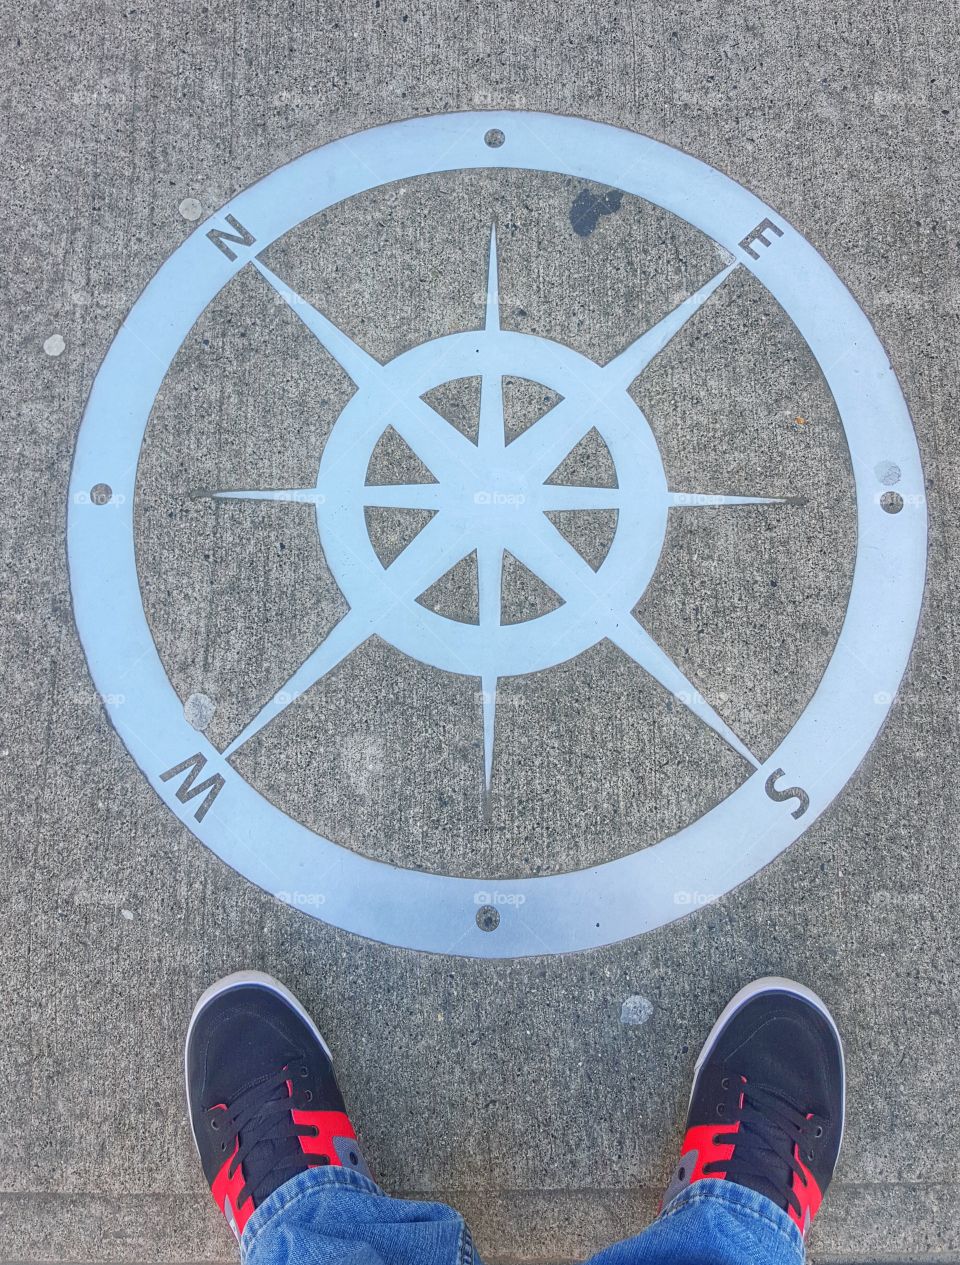 Compass on the ground